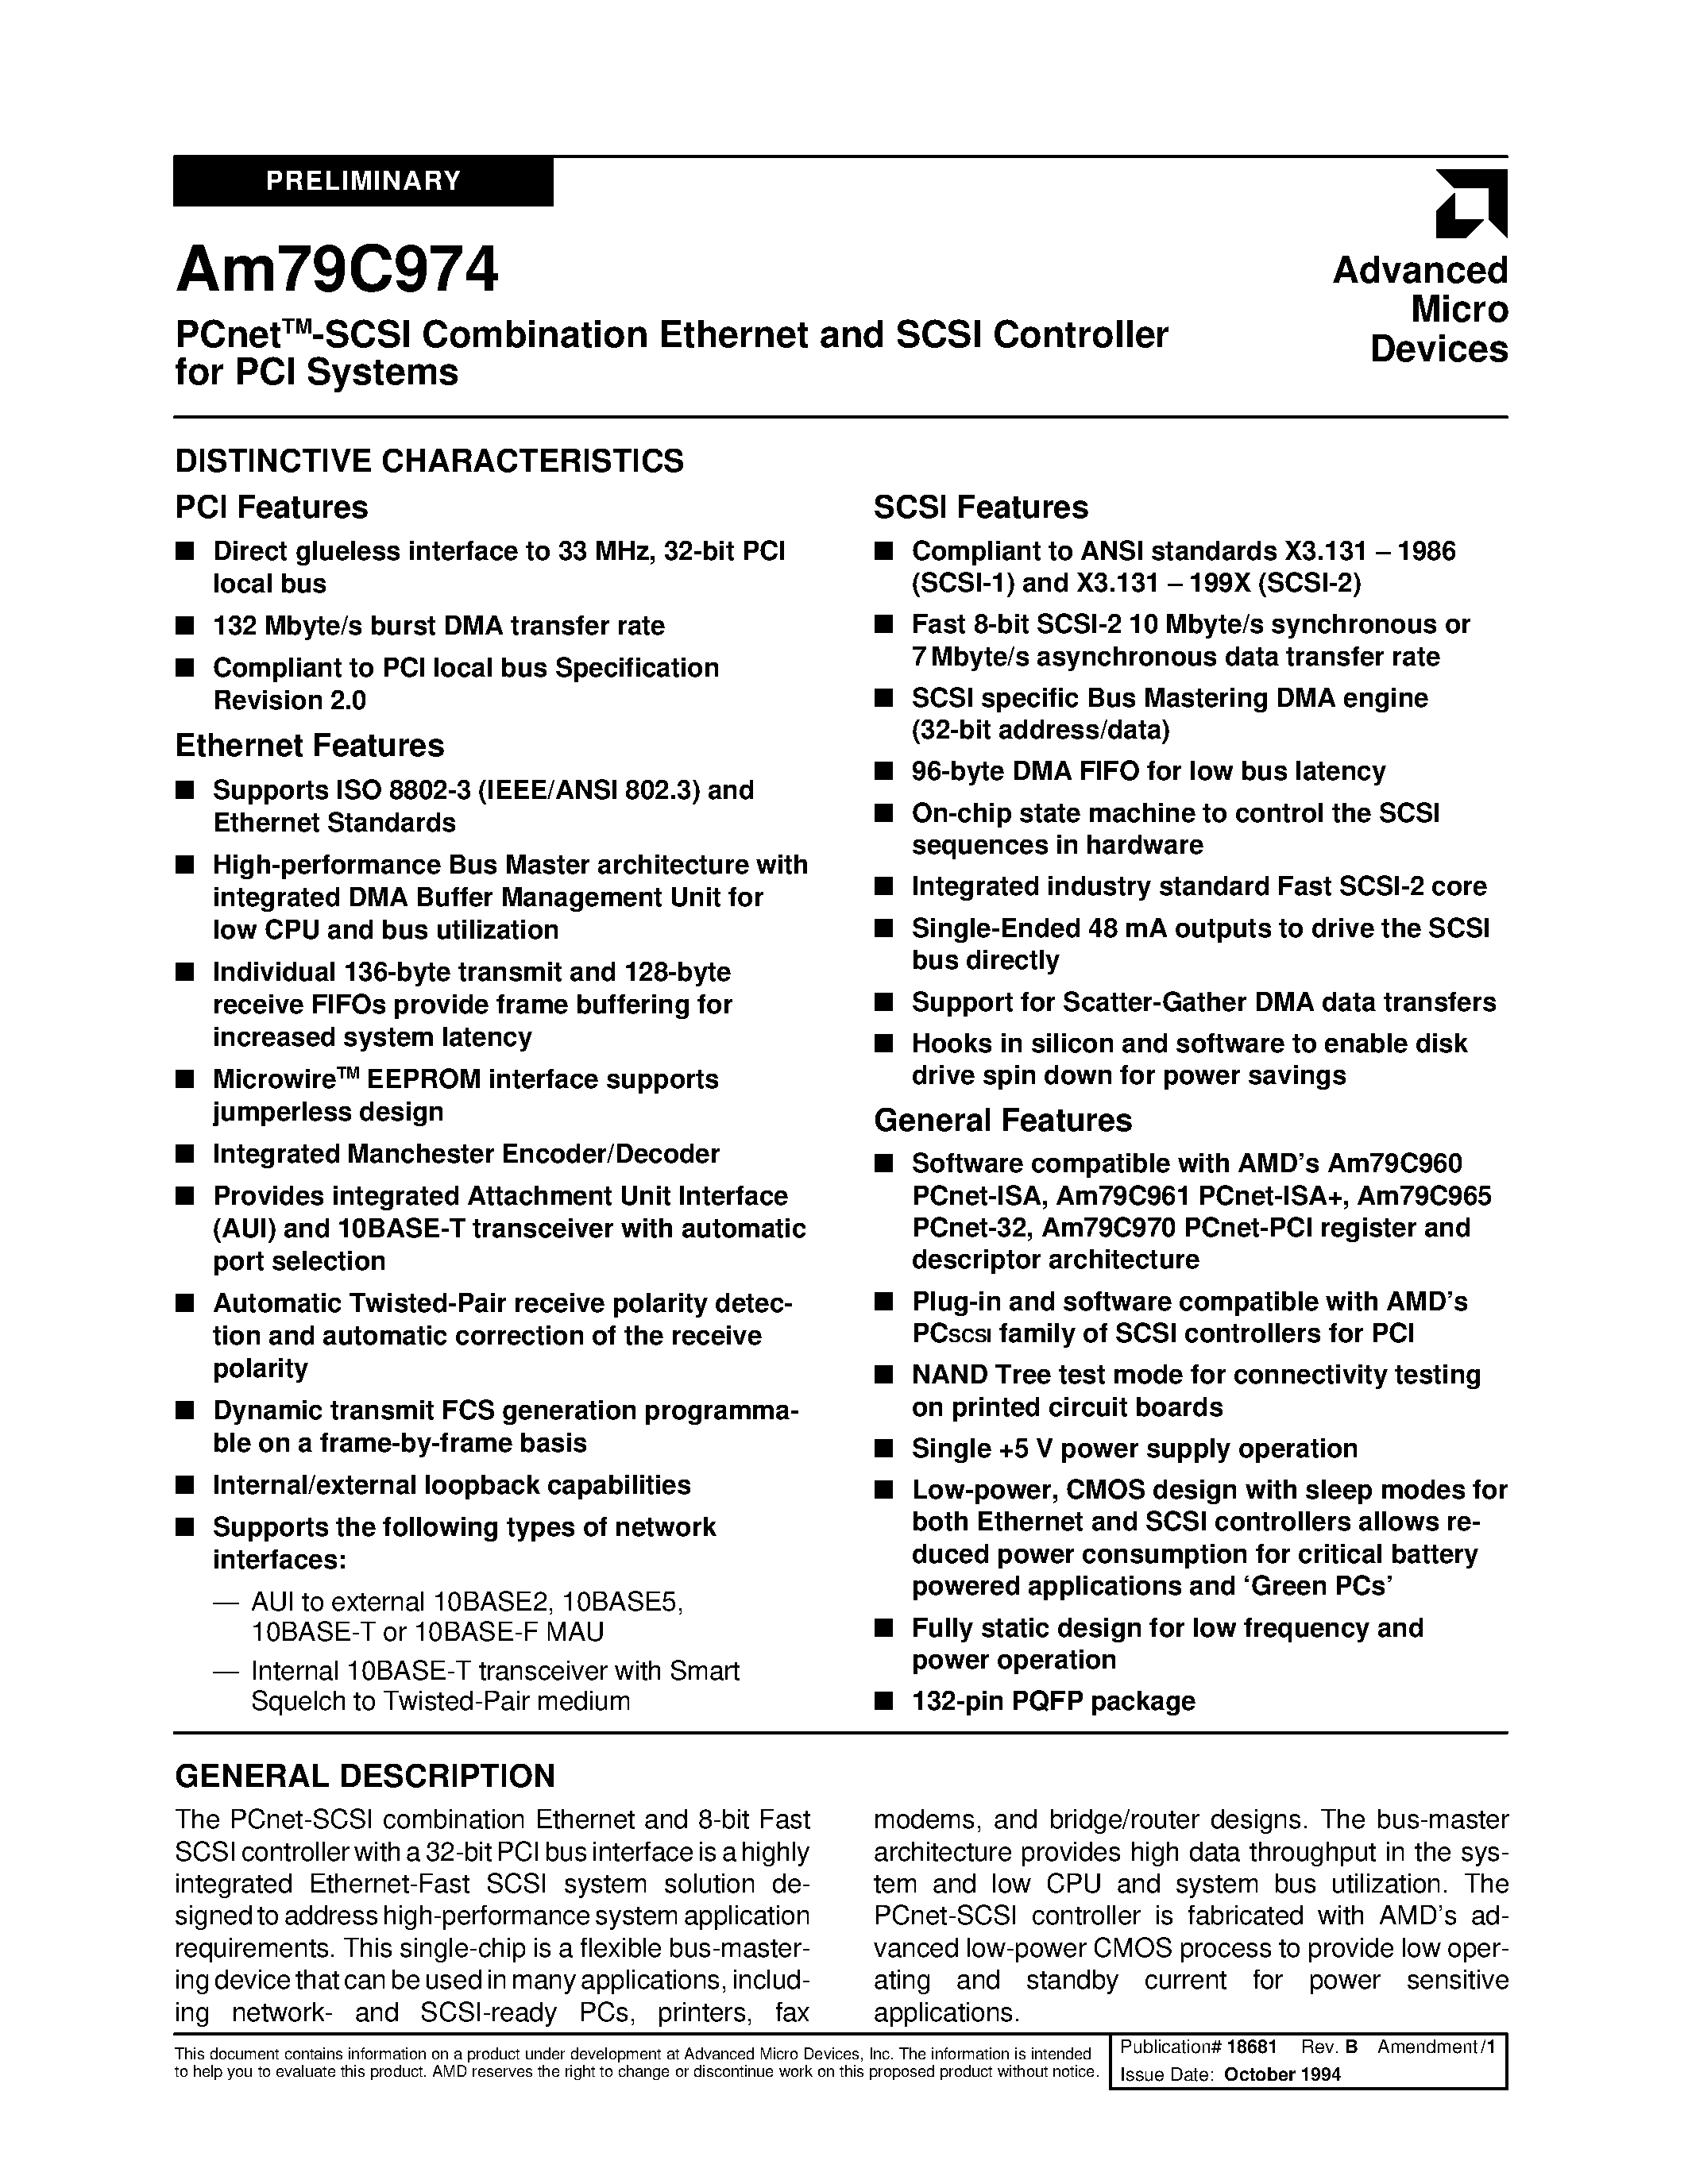 Datasheet AM79C974 - PCnetTM-SCSI Combination Ethernet and SCSI Controller for PCI Systems page 1